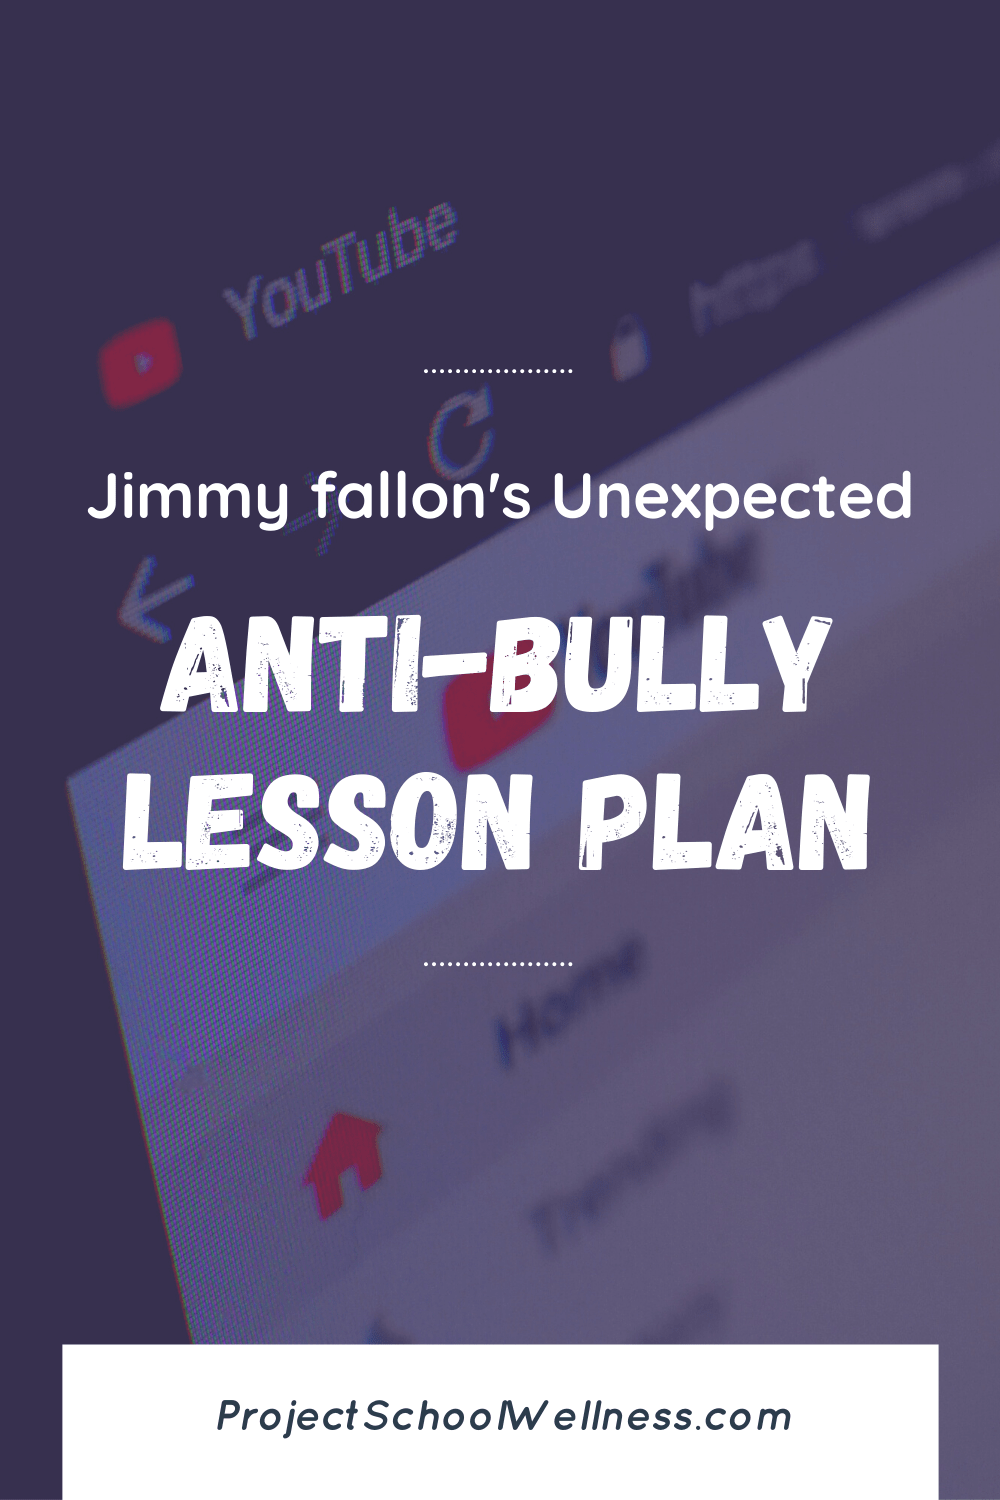 Jimmy Fallon's Unexpected Anti-Bully Lesson Plan - A quick and easy lesson on bullying and building an anti-bully school culture